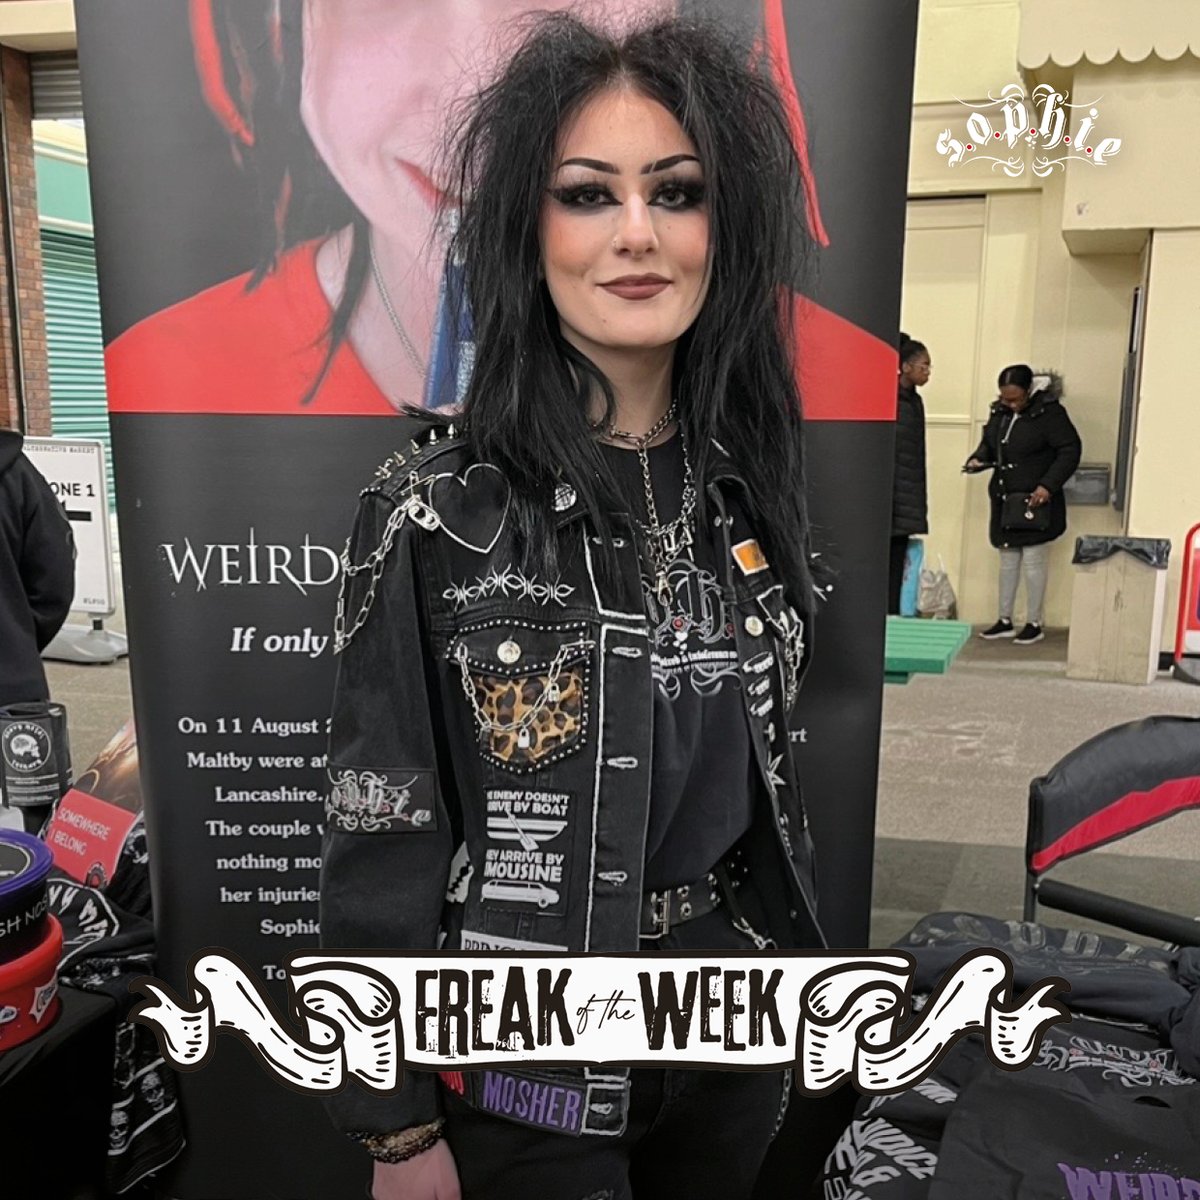 Freak Of The Week this week is Casey, looking fabulous in her Sophie t-shirt, paired with jacked loaded with our patches! 😍🖤 Thank you for your support! 🖤 #wearesophie